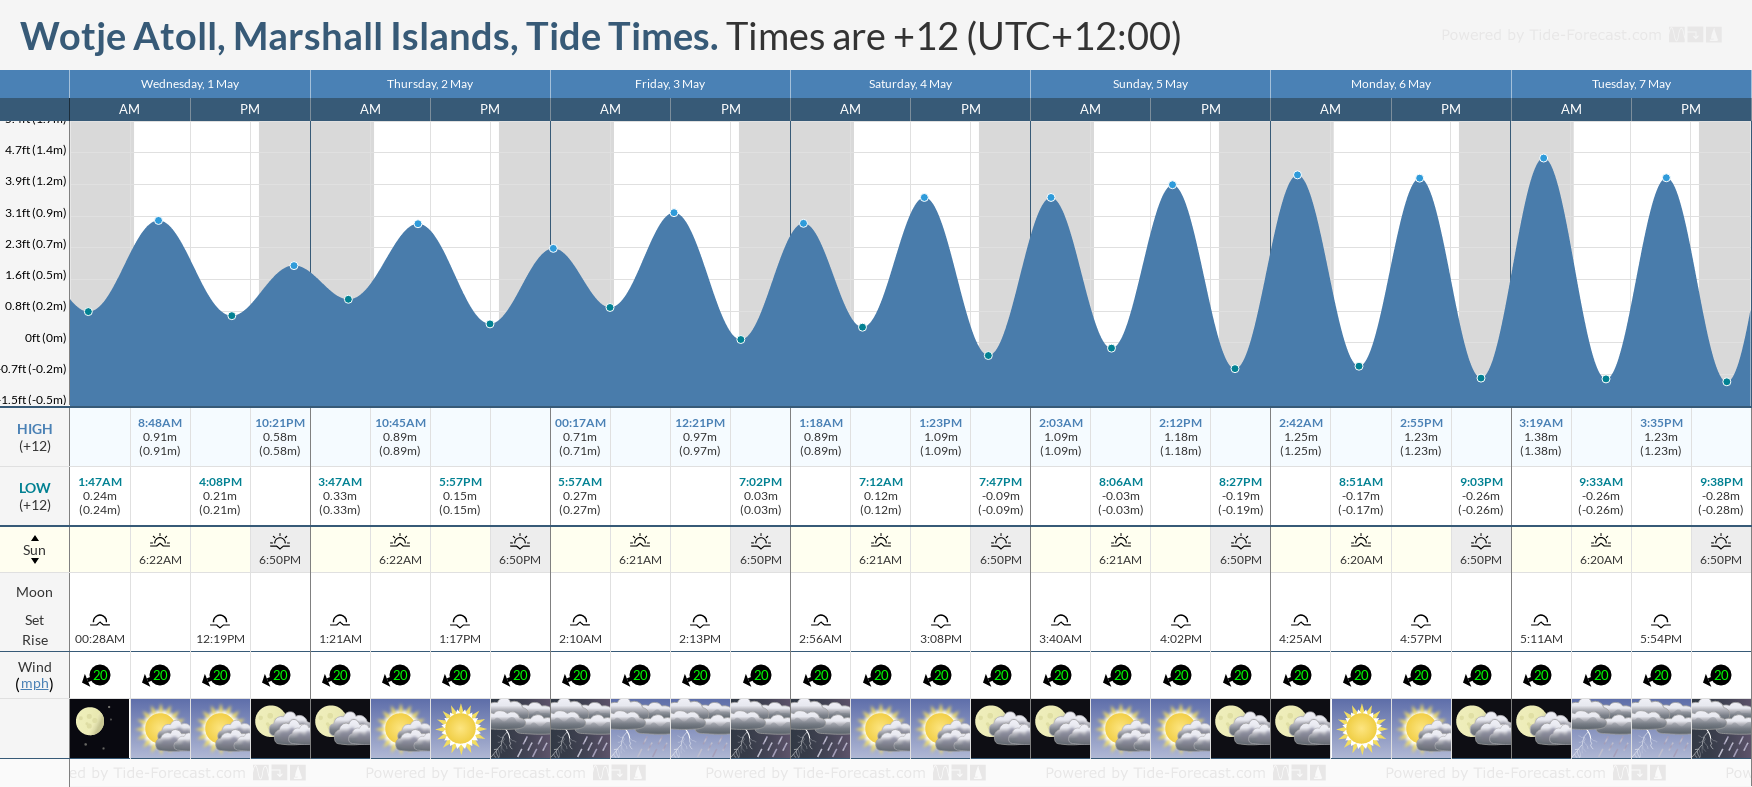 Wotje Atoll, Marshall Islands Tide Chart including high and low tide times for the next 7 days